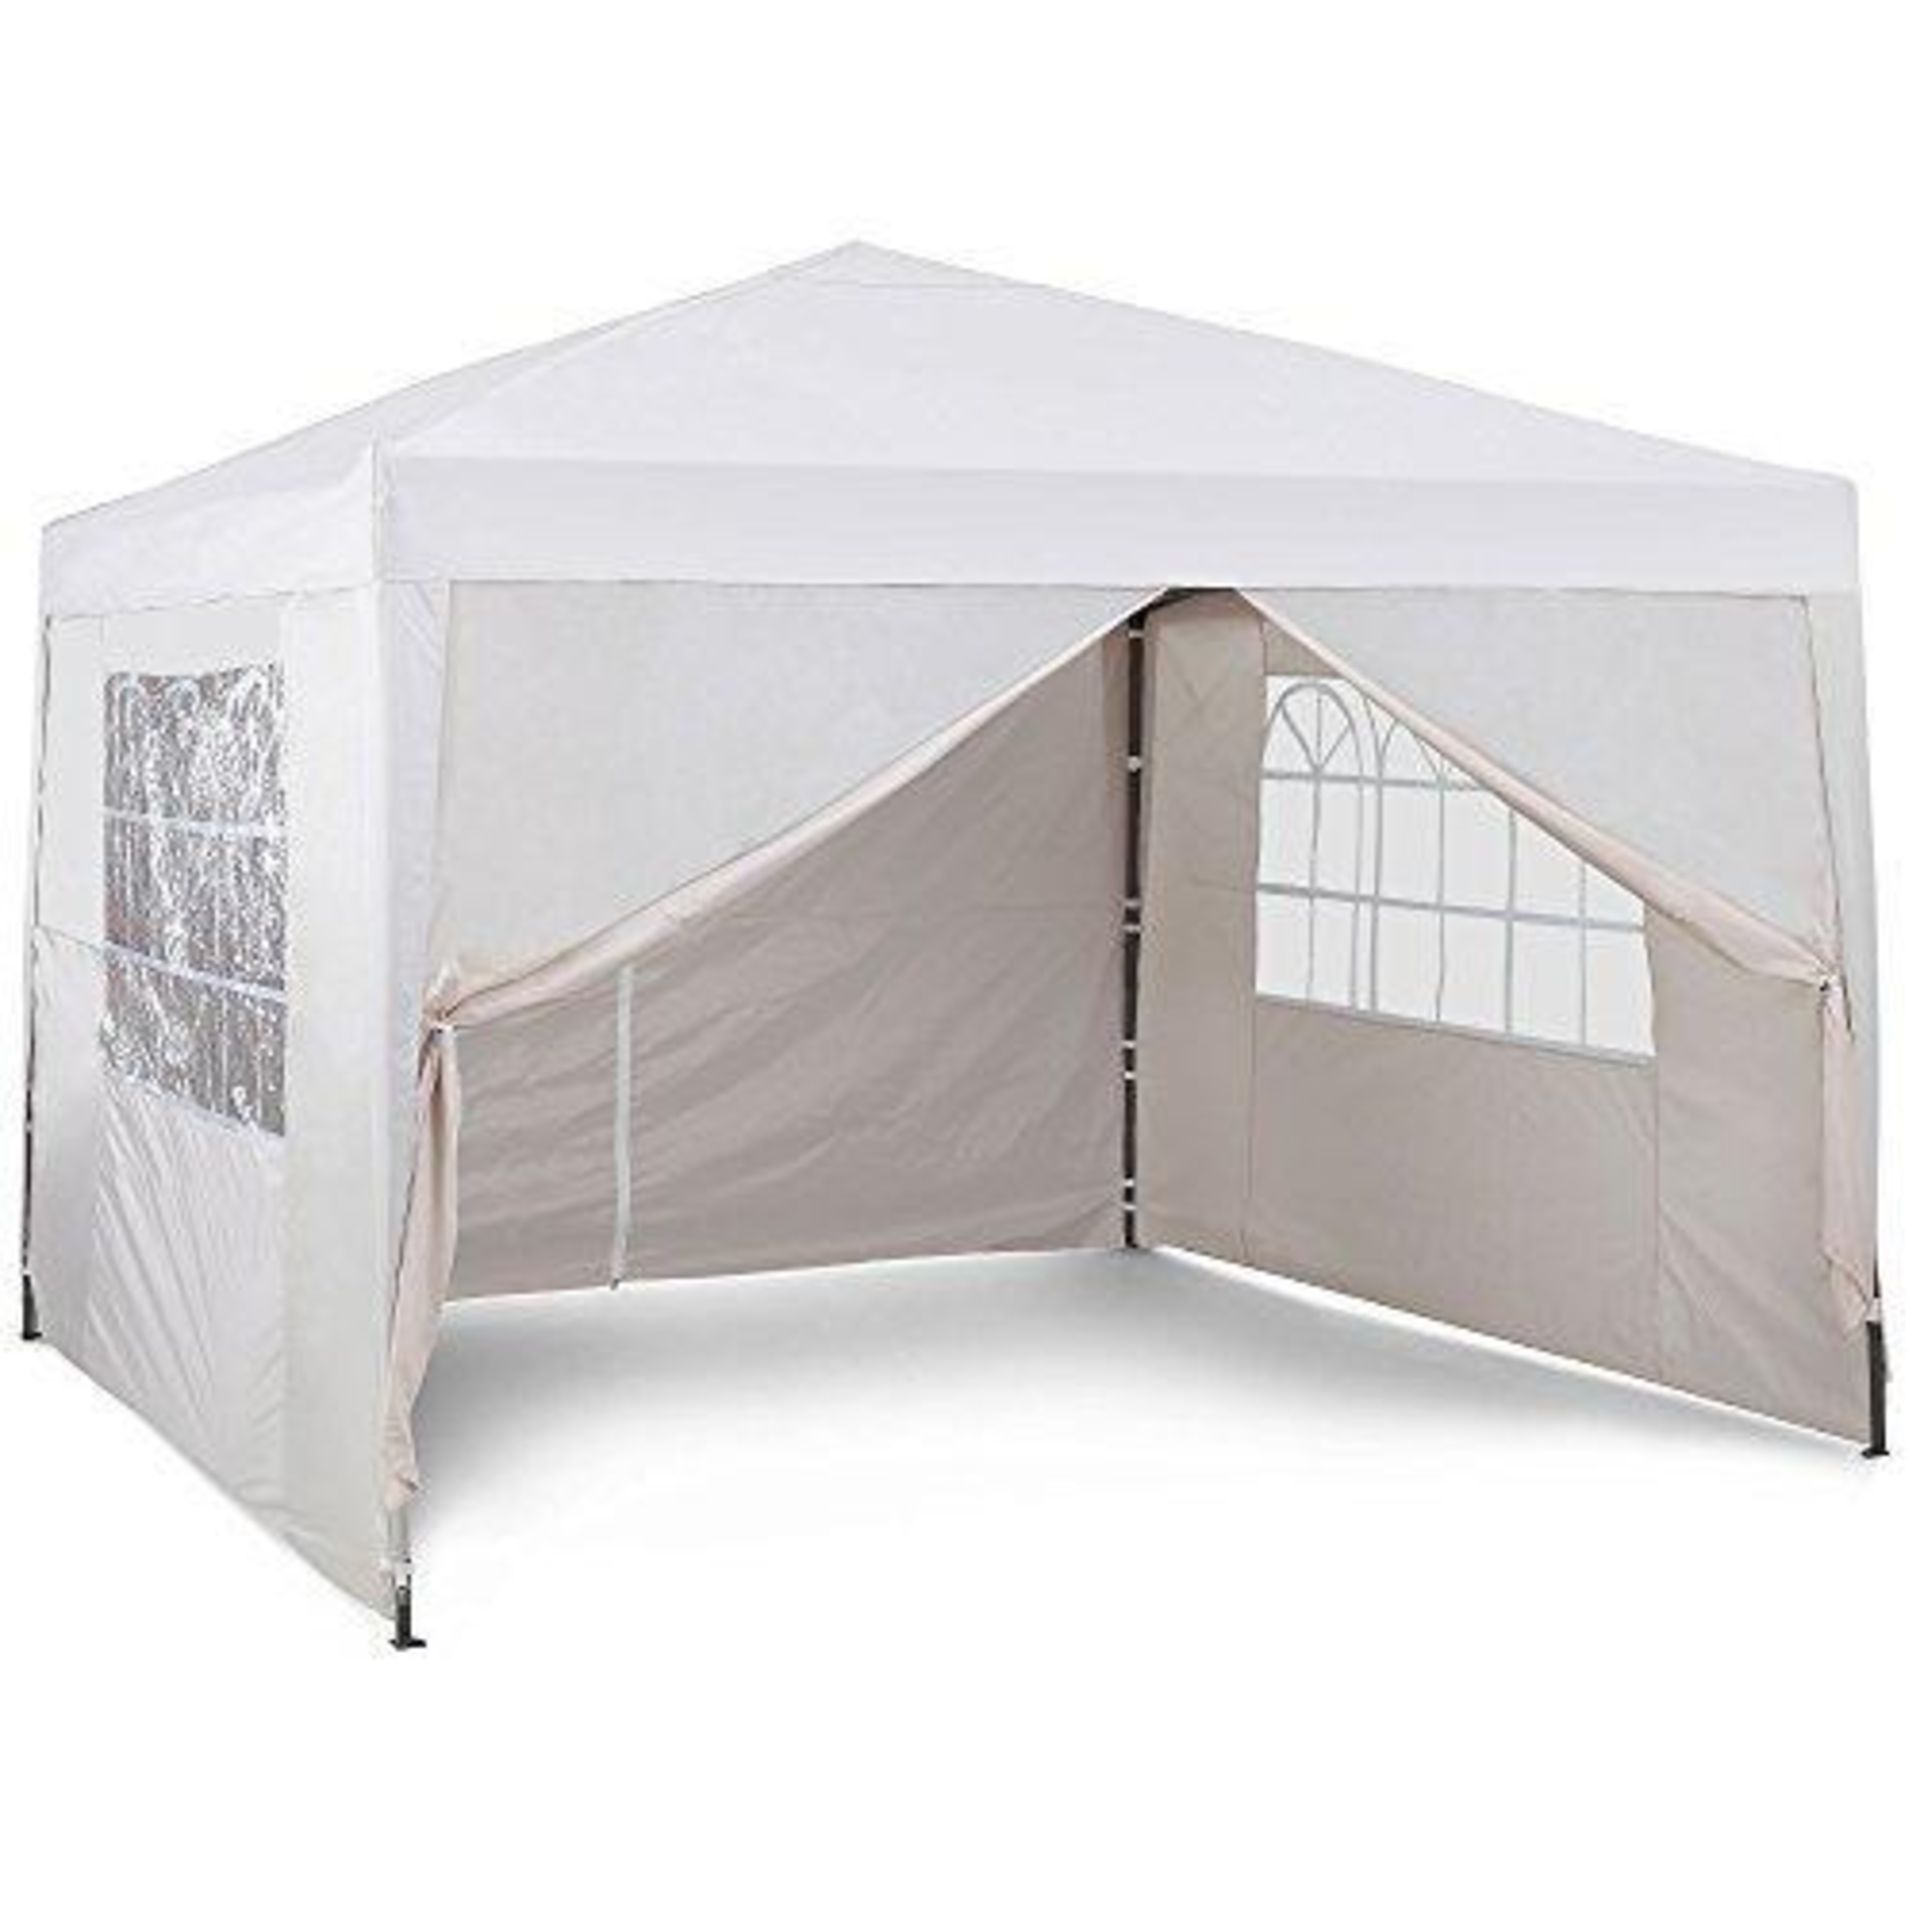 Ivory Pop-up Gazebo Set 3 X 3m Ivory Pop-up Gazebo with WeightsTransform your garden with our 3 x 3m - Image 5 of 5